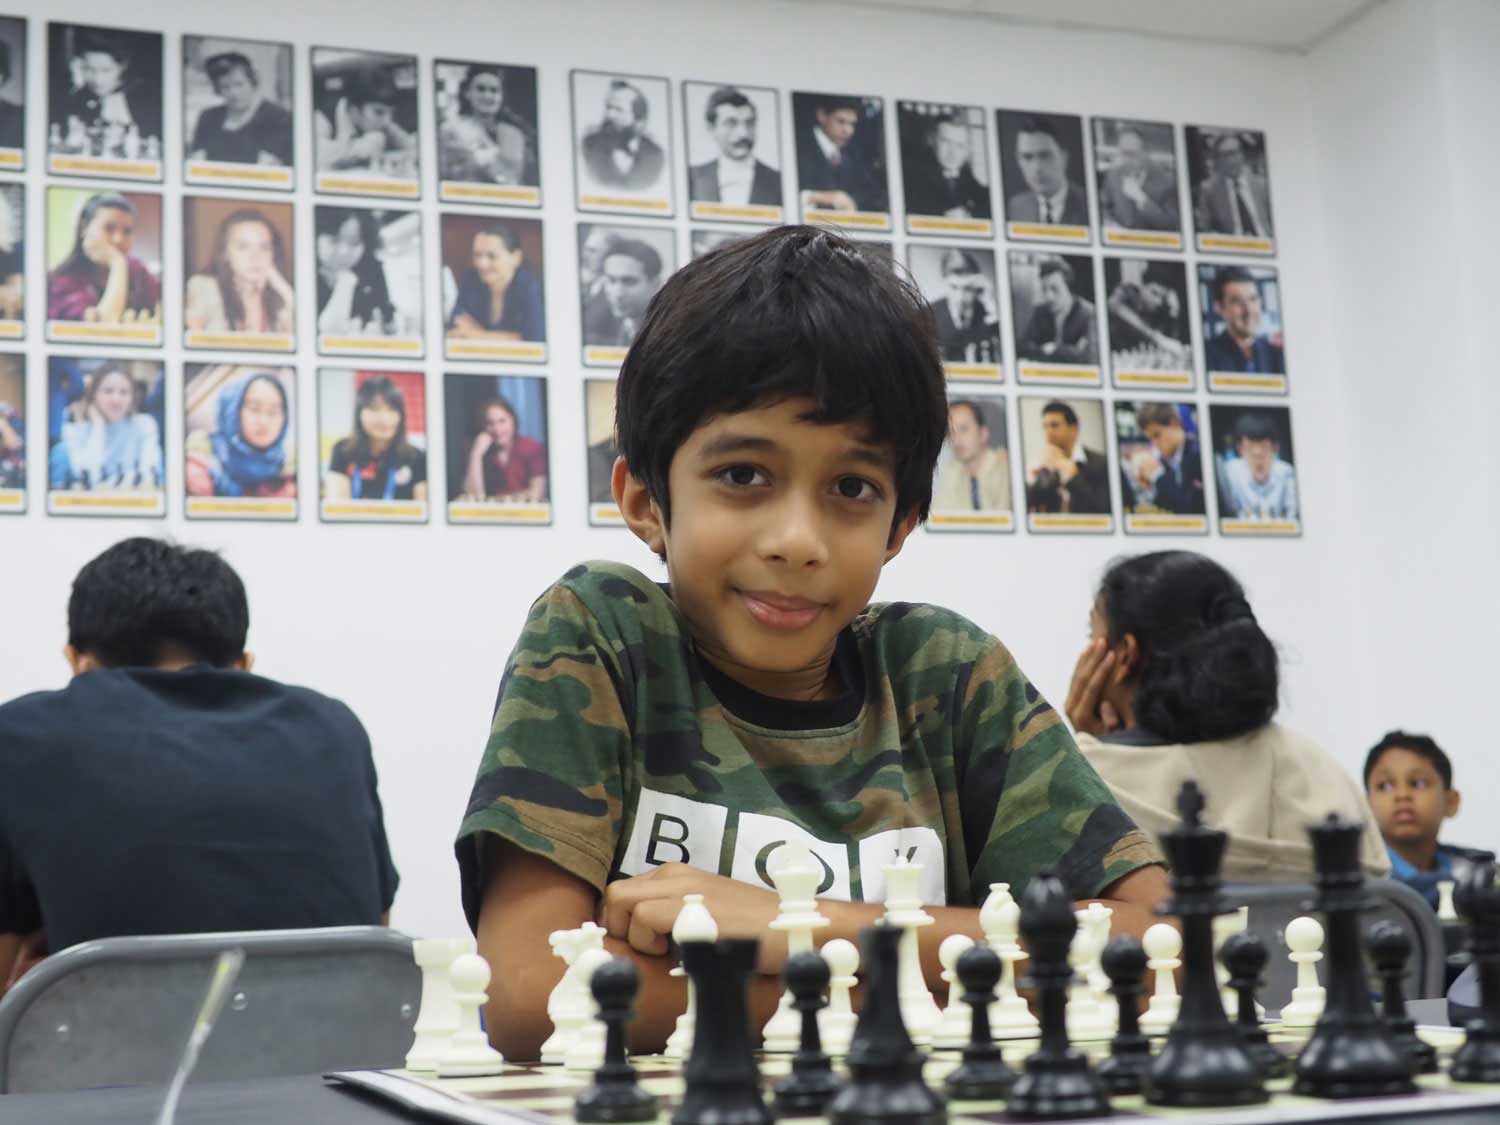 A young boy sits behind a chess board that has been set up for a game.